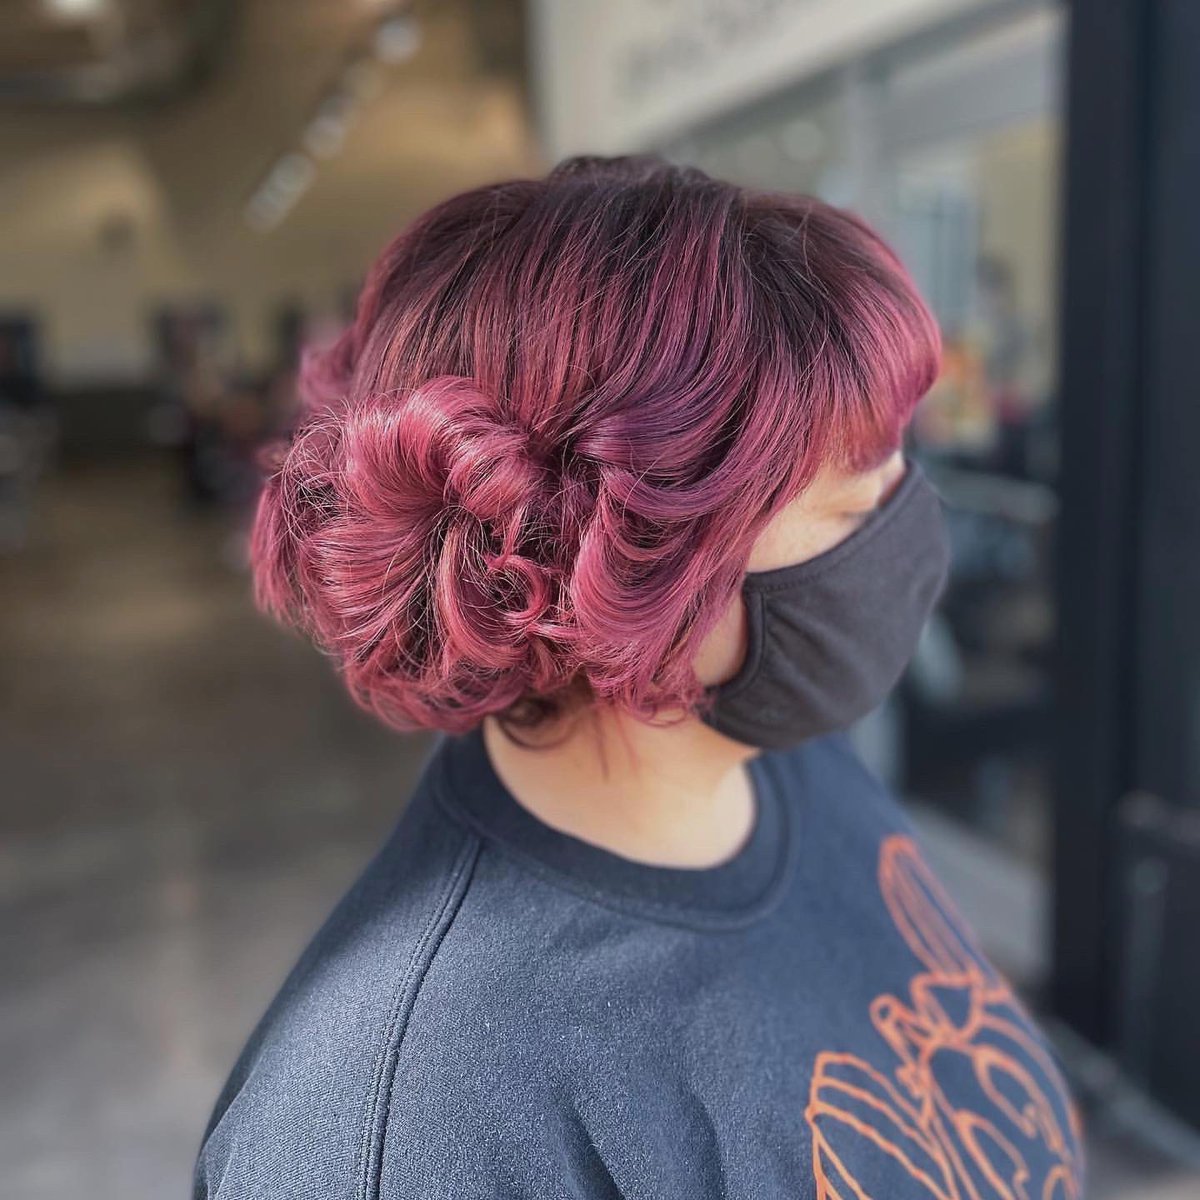 A subtle but elegant thermal set✨

Created by @inspiredby.annastylez
.
.
.
#thermalset #thermal #curl #pmtsnorman #cosmetology